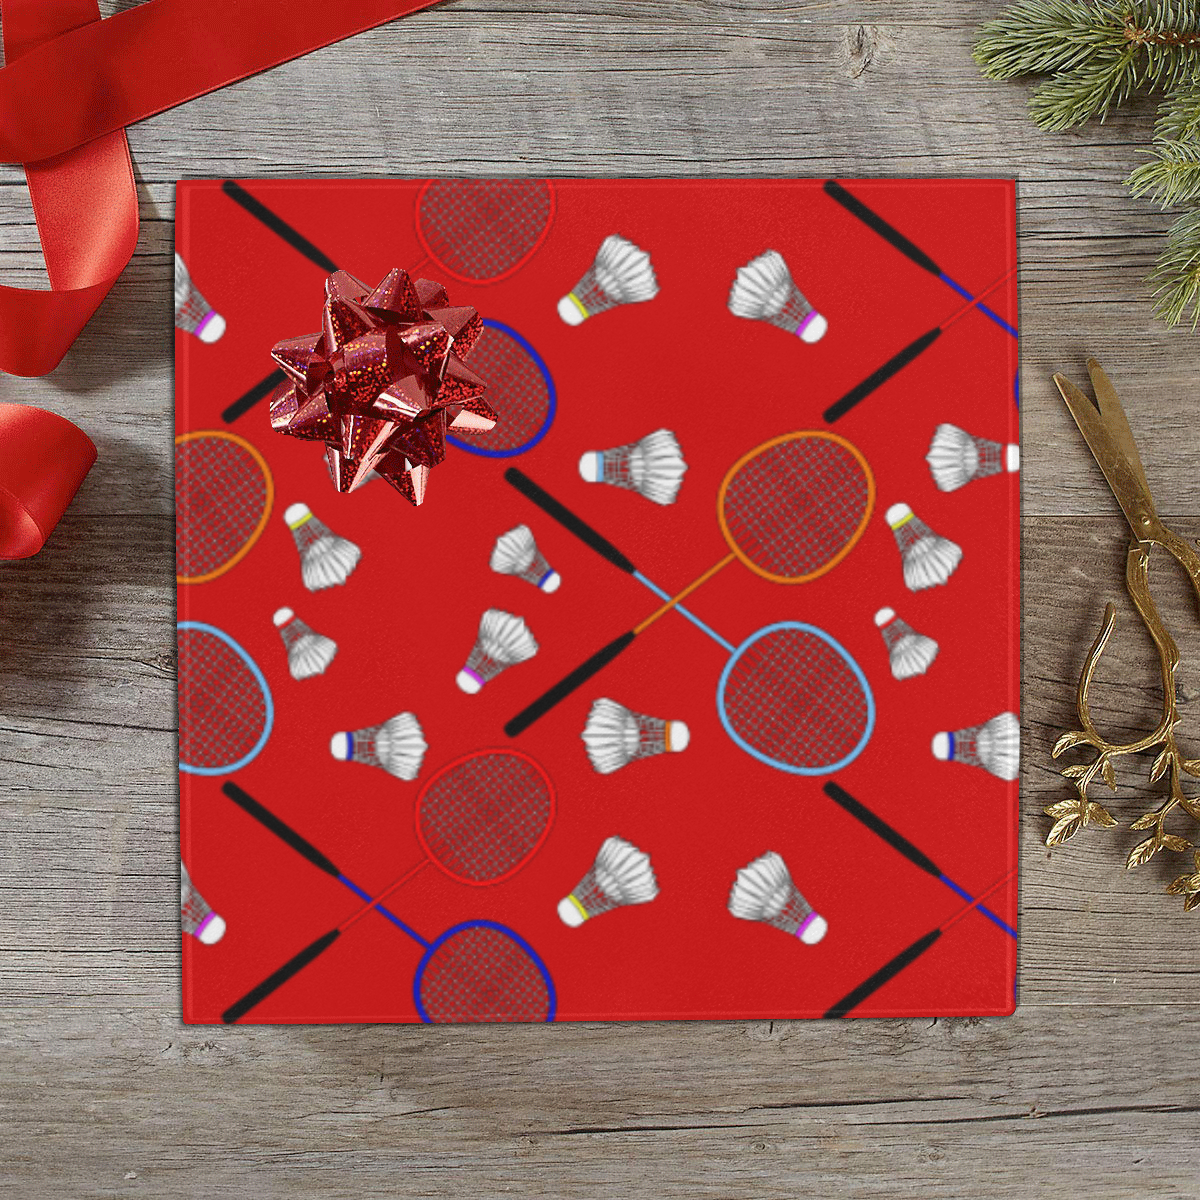 Badminton Rackets and Shuttlecocks Pattern Sports Red Gift Wrapping Paper 58"x 23" (2 Rolls)